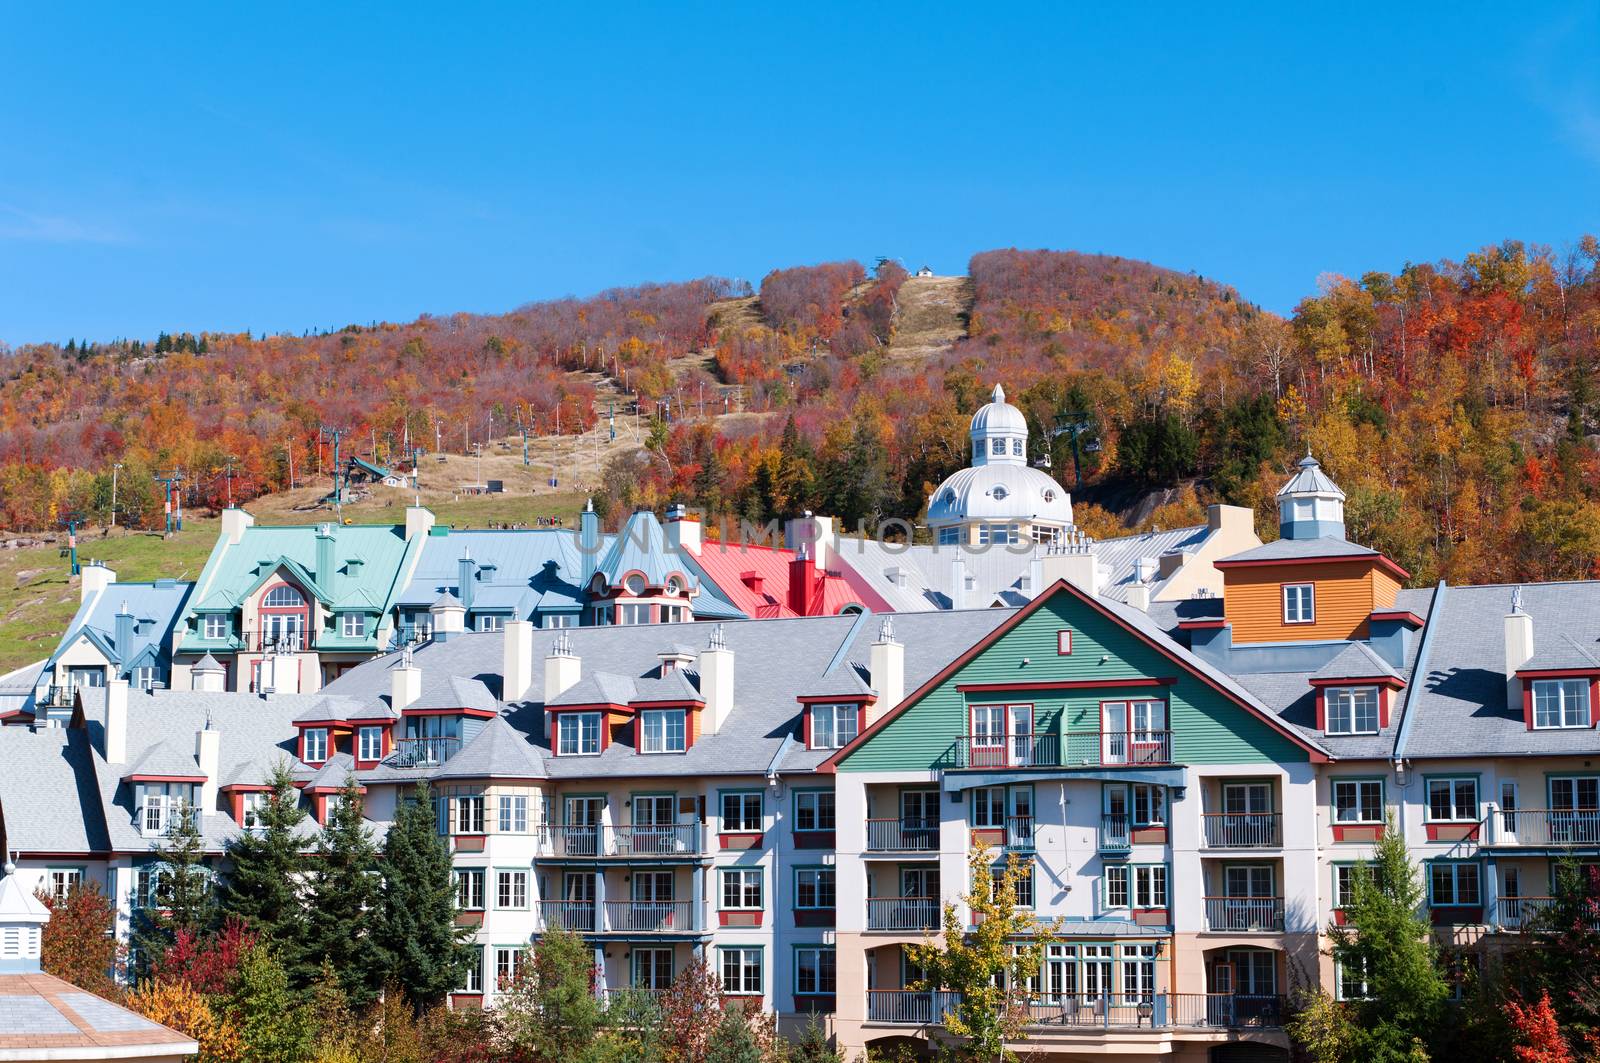 Colorful Hotels in Mont Tremblant, Quebec during autumn